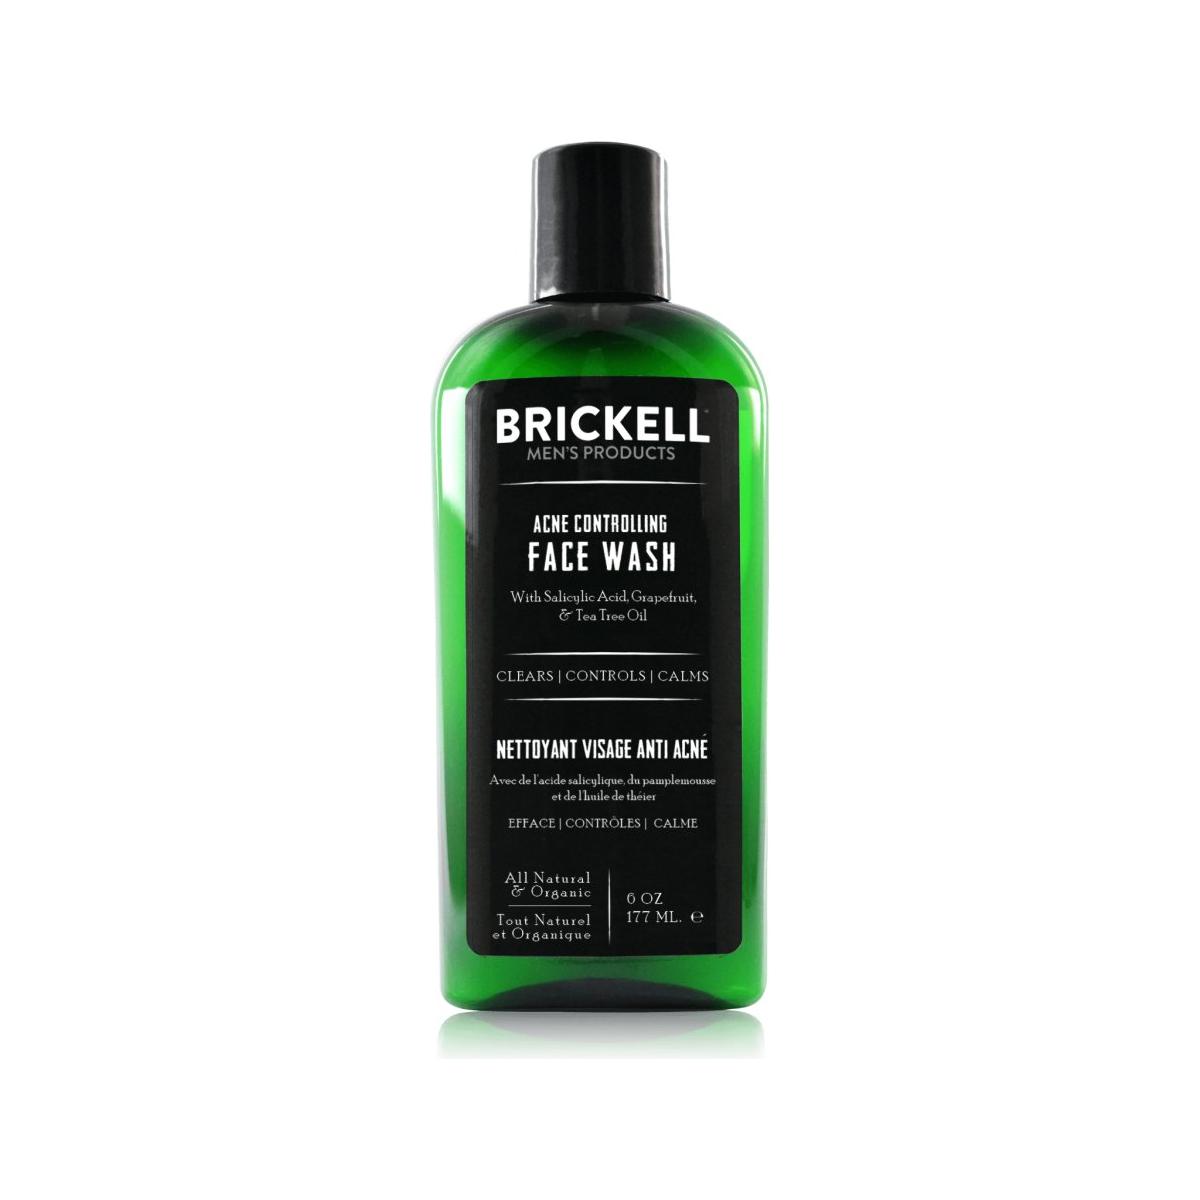 Brickell Acne Controlling Face Wash - 177ml - Glam Global UK